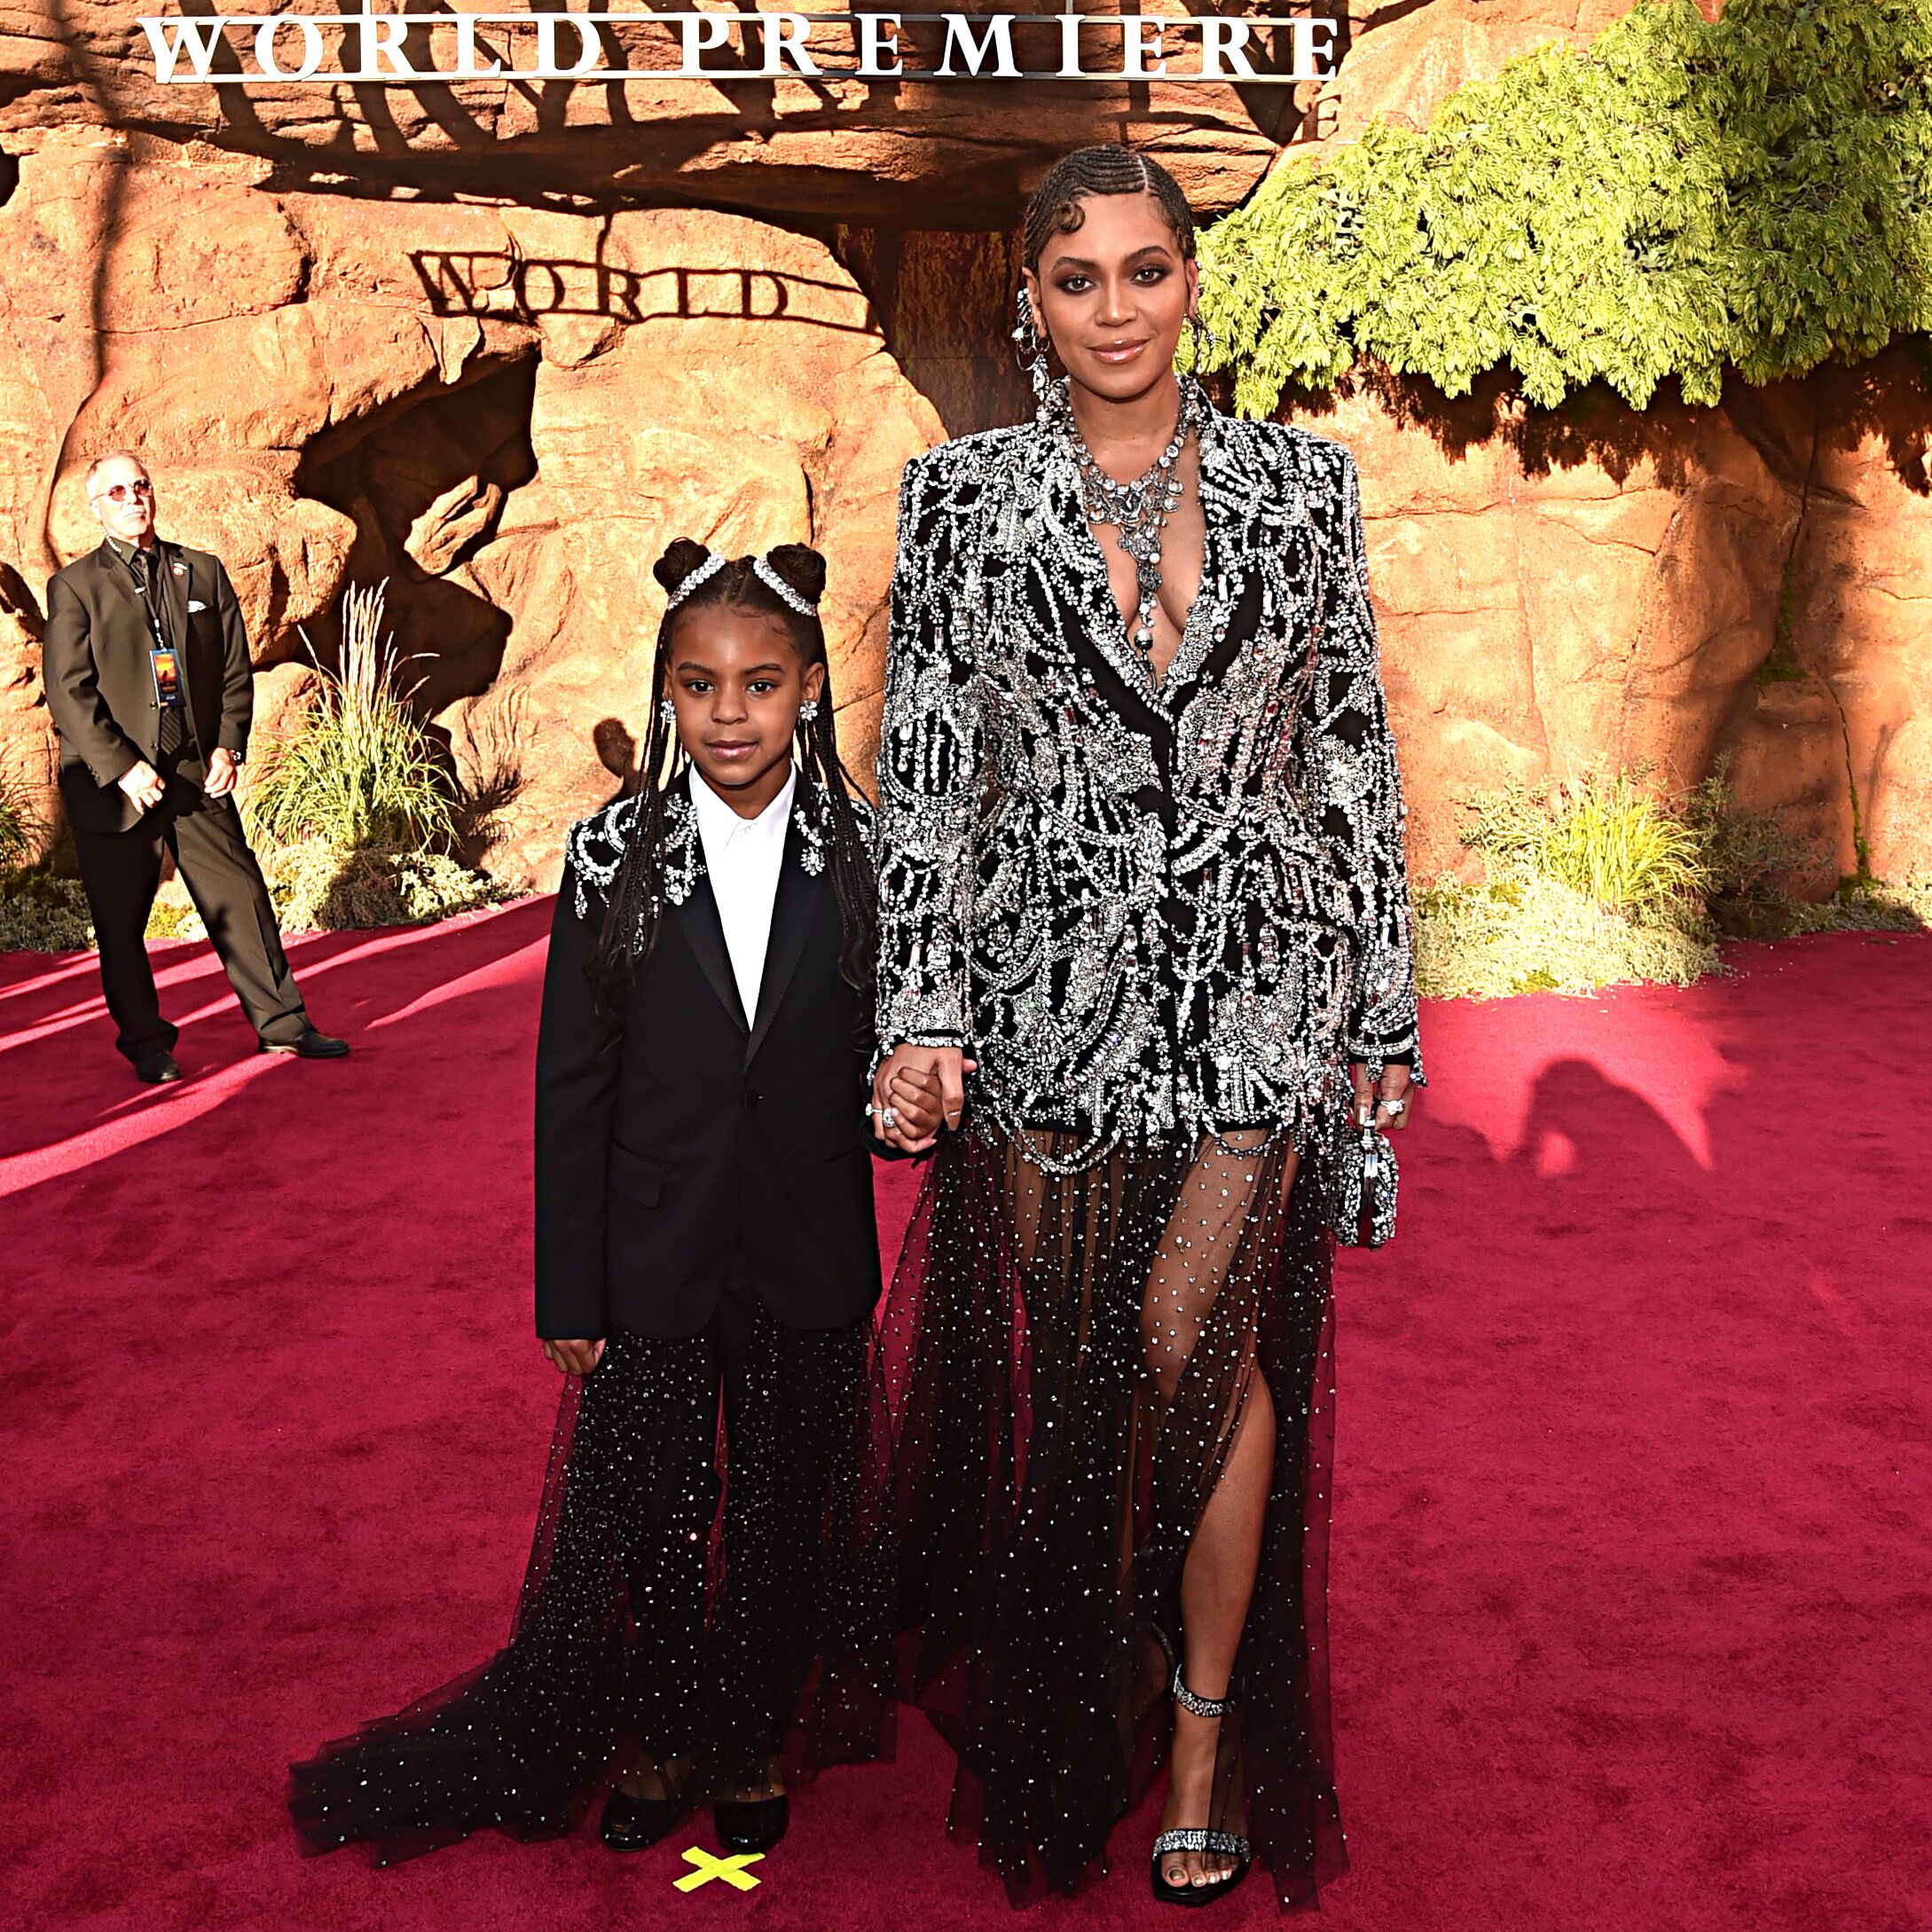 Beyoncé and Blue Ivy at the world premiere of "The Lion King" in 2019 | Source: Getty Images